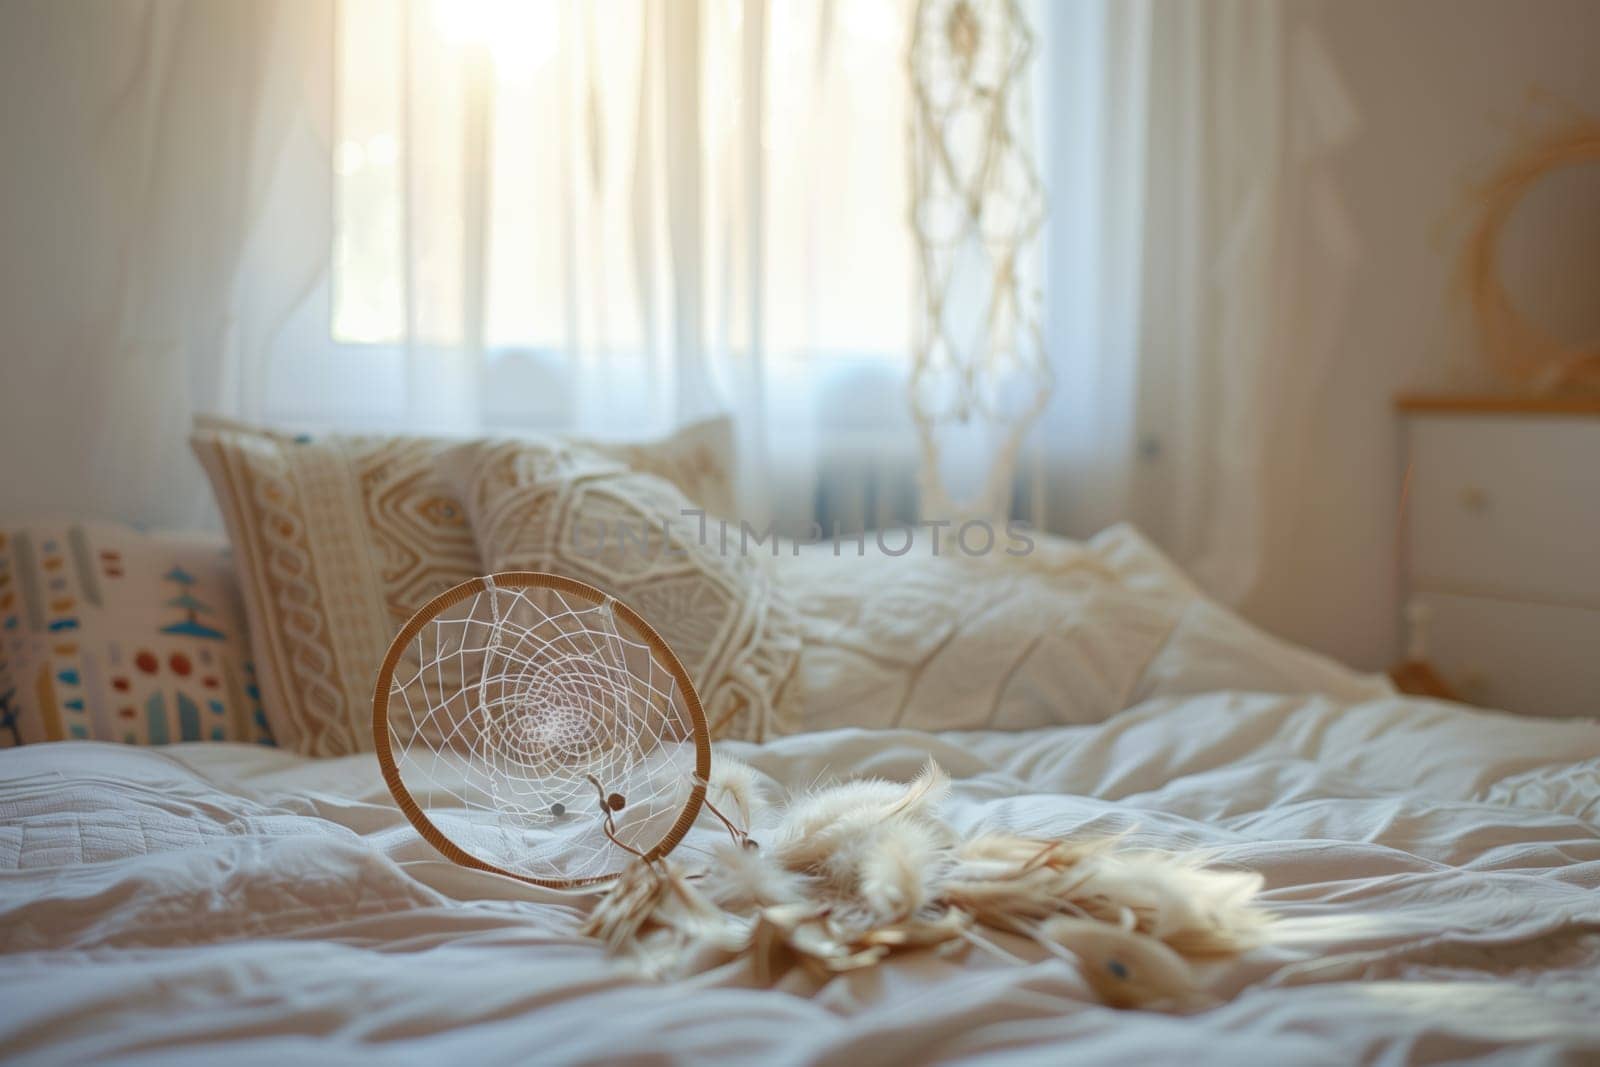 A dream catcher adorns the bed frame in the cozy, wellfurnished bedroom by richwolf